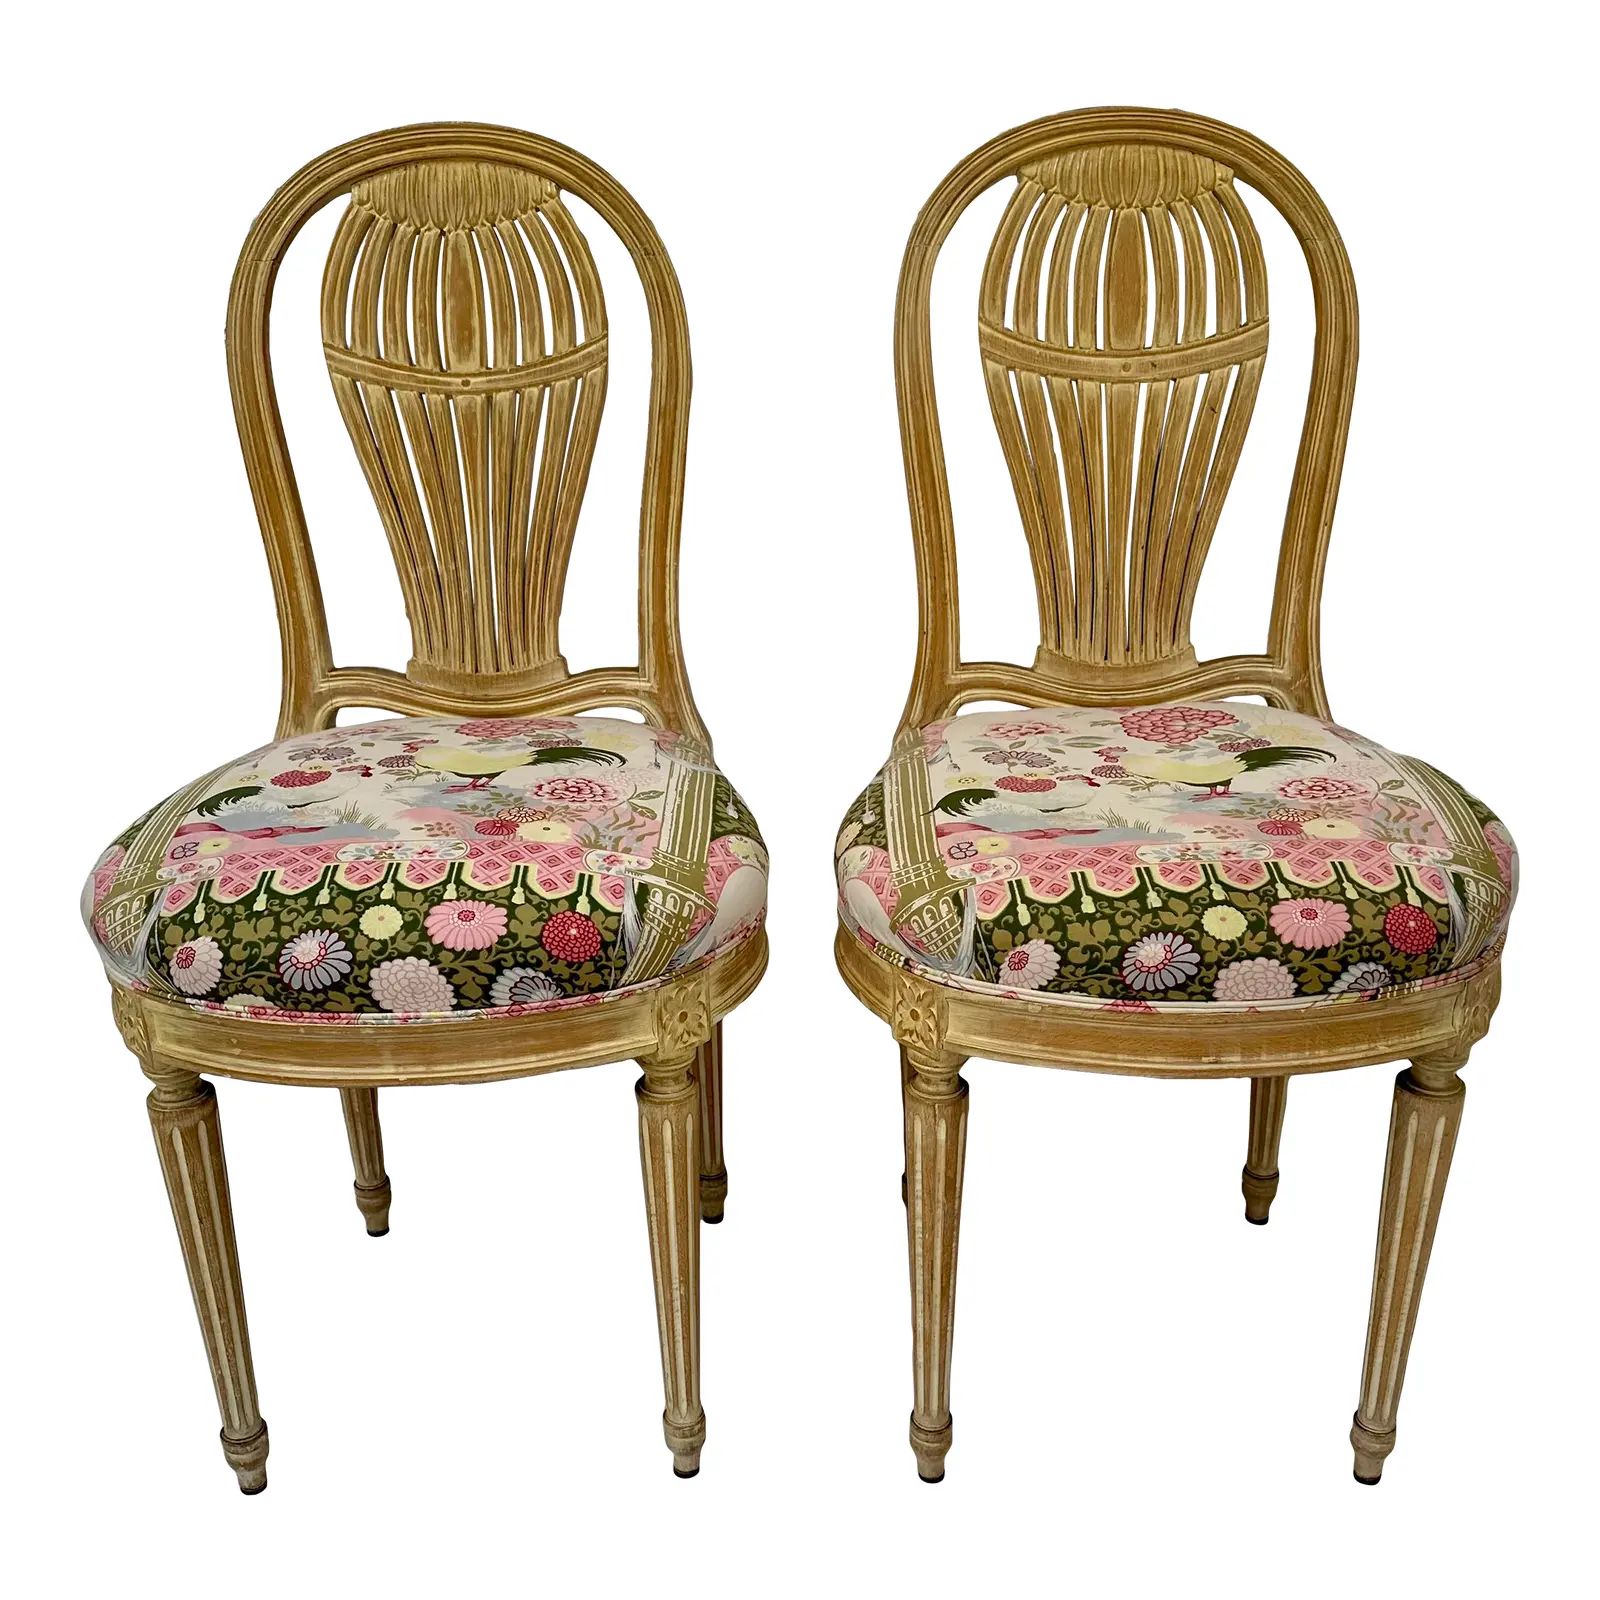 Pair of Vintage Maison Jansen French Hot Air Balloon Back Side Chairs | Chairish